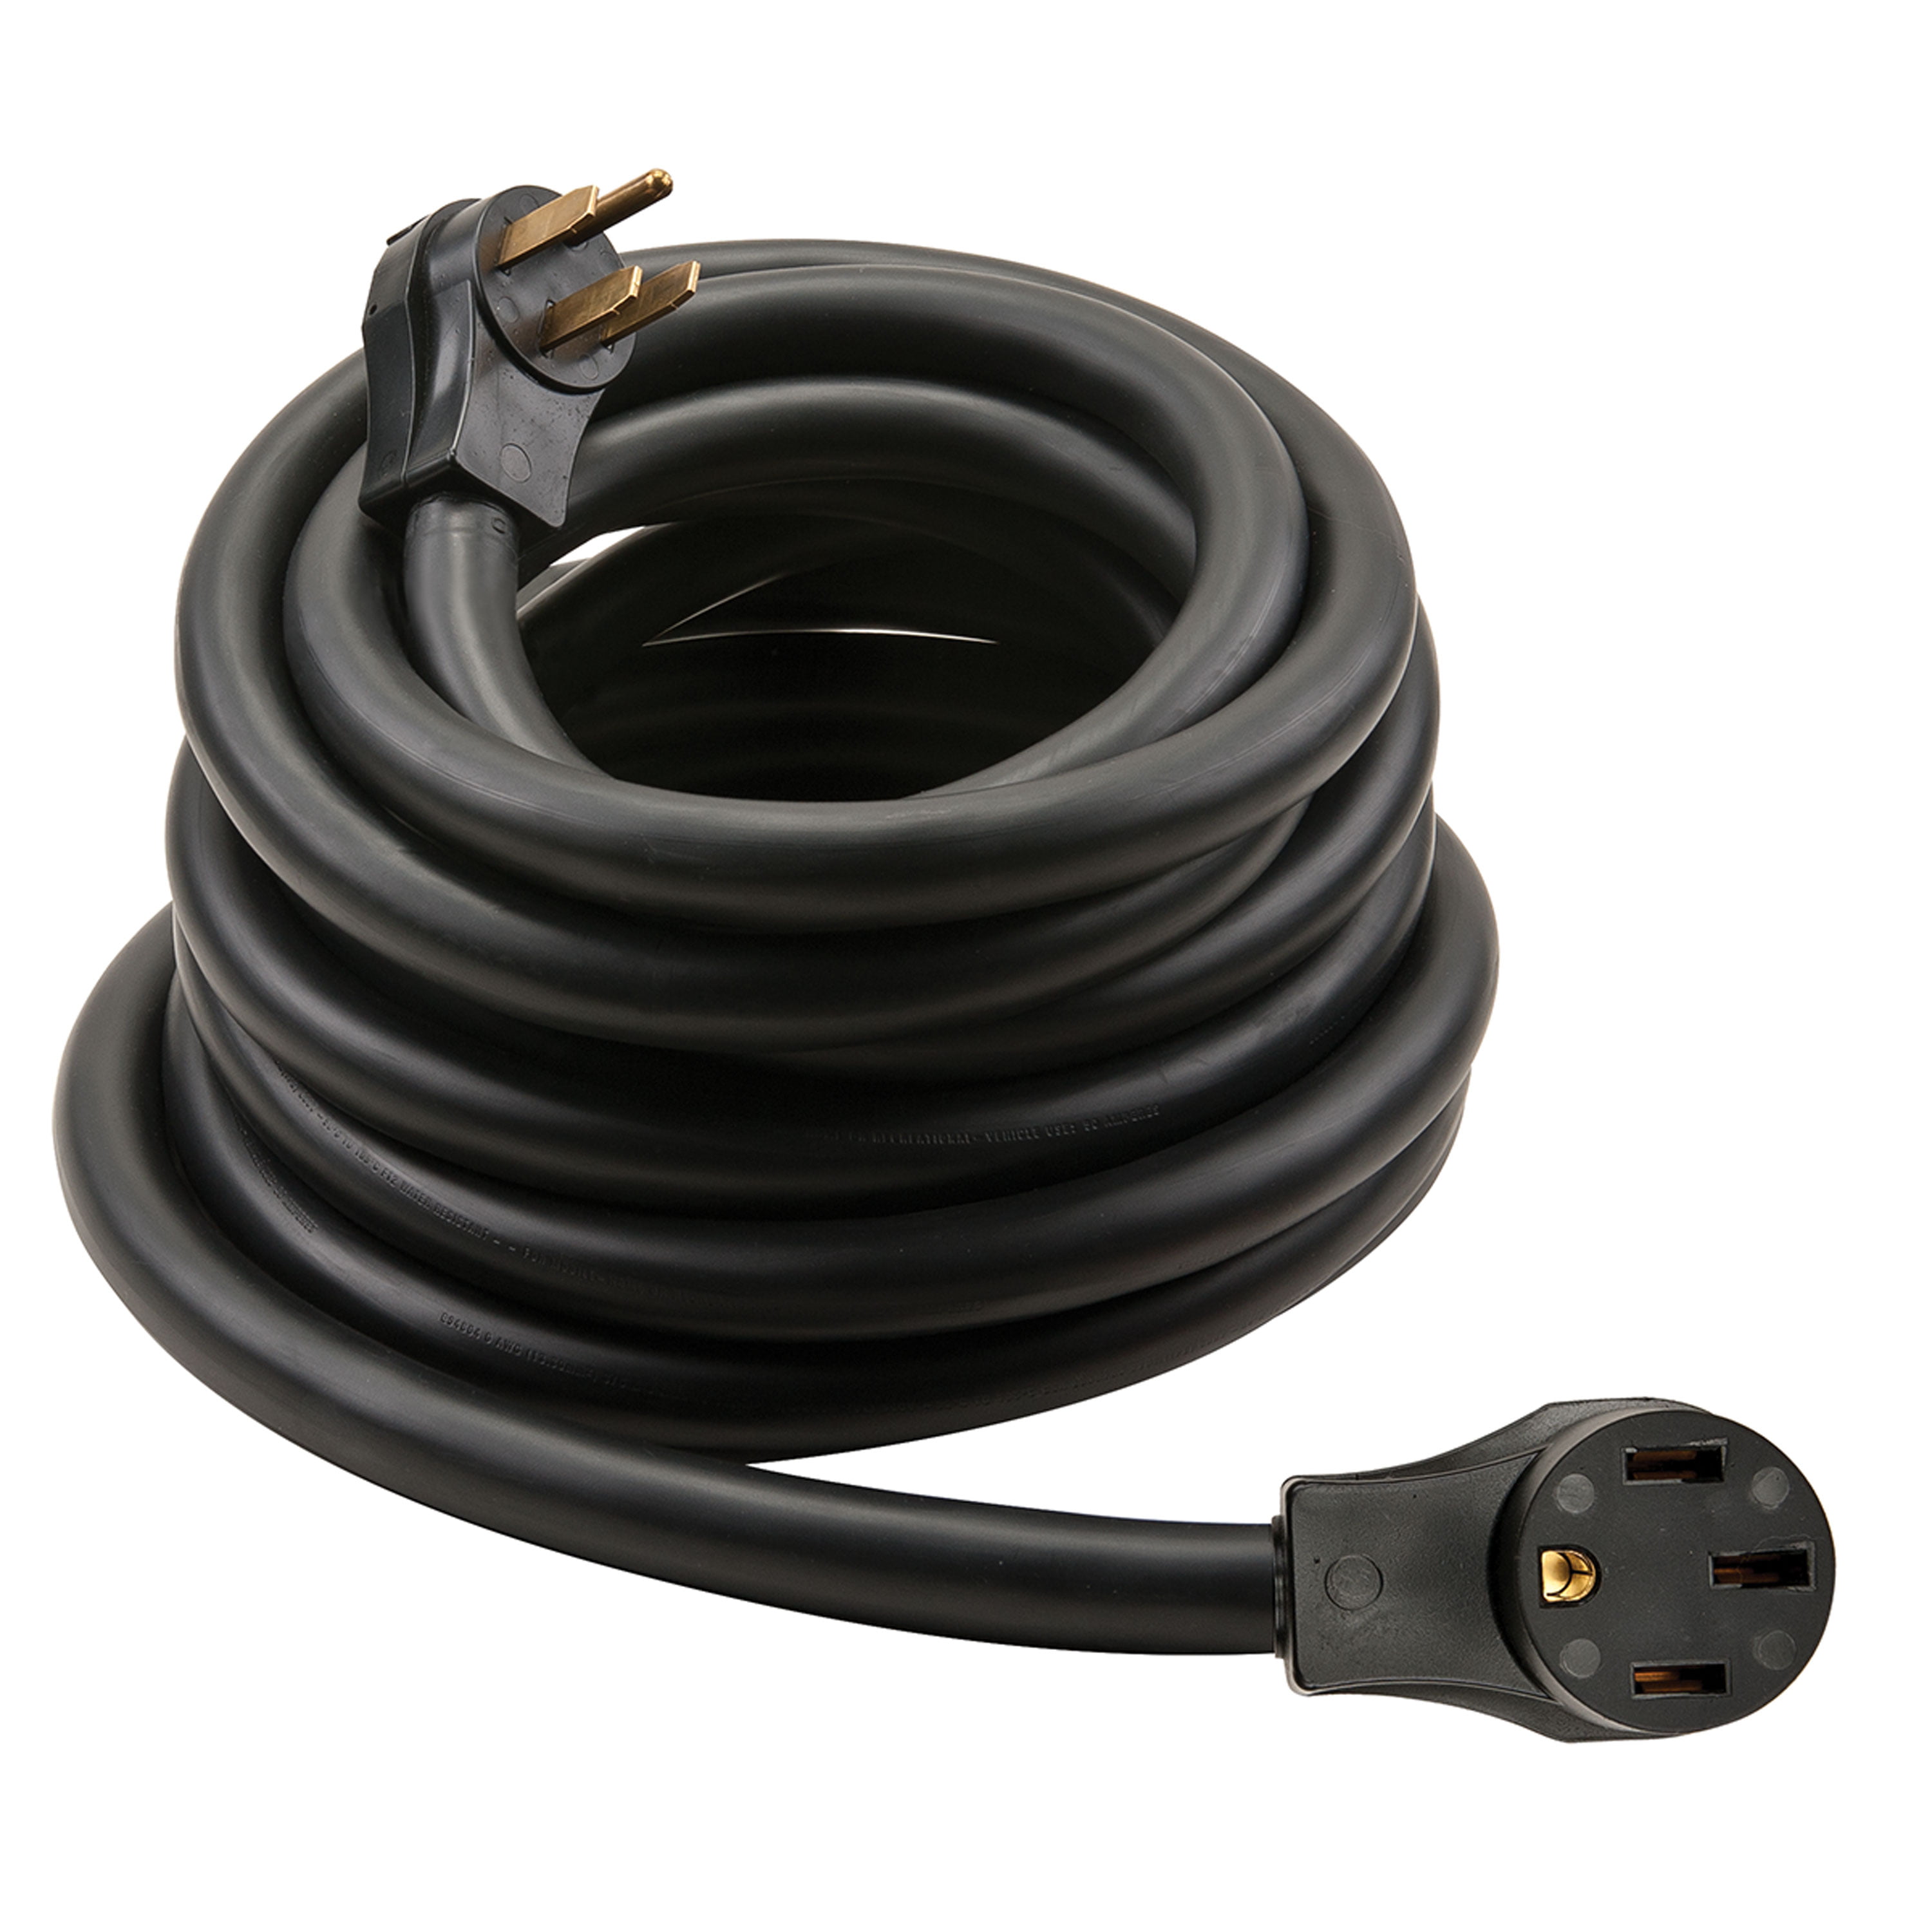 Conntek 15306 RV 50-Amp 30-Feet Extension Cord with Ergo Grip and Power Indicator